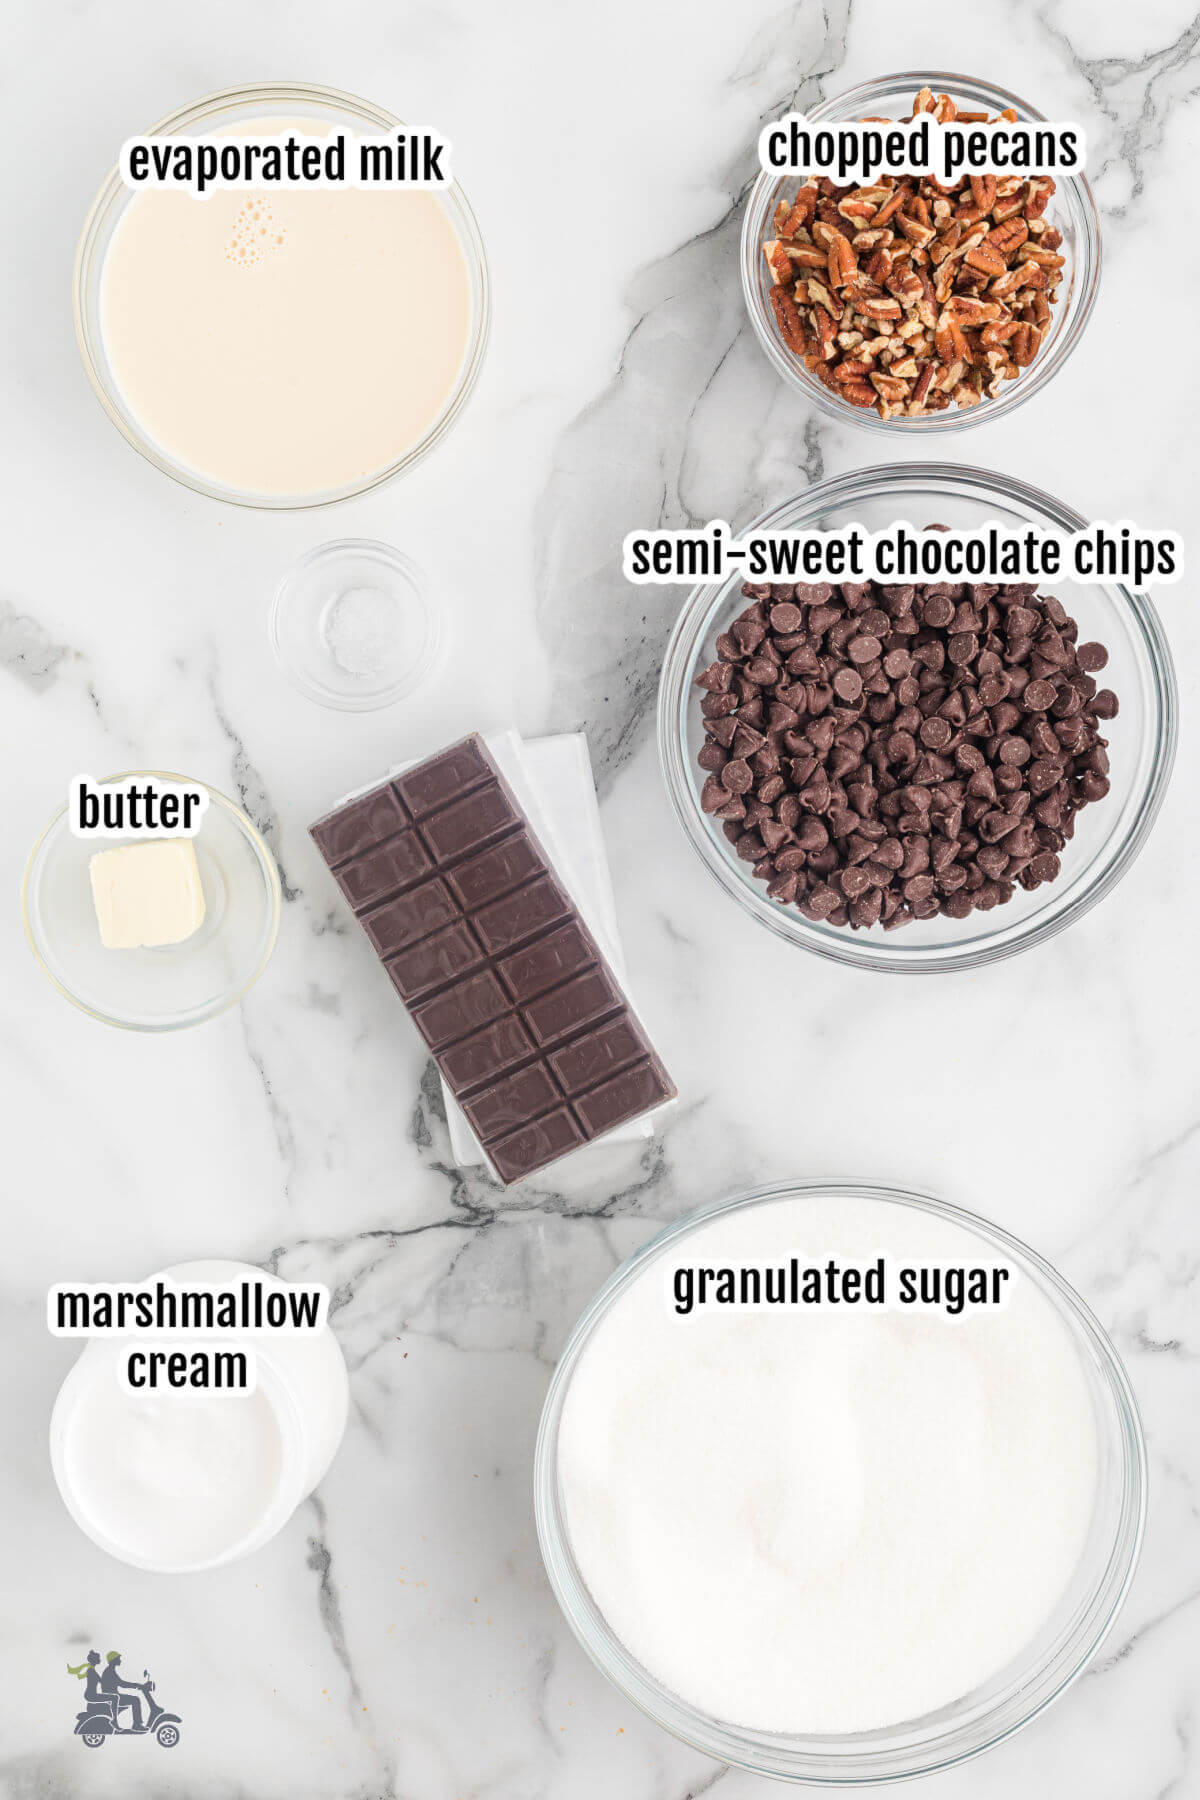 Image of ingredients needed to make chocolate fudge with marshmallow cream.